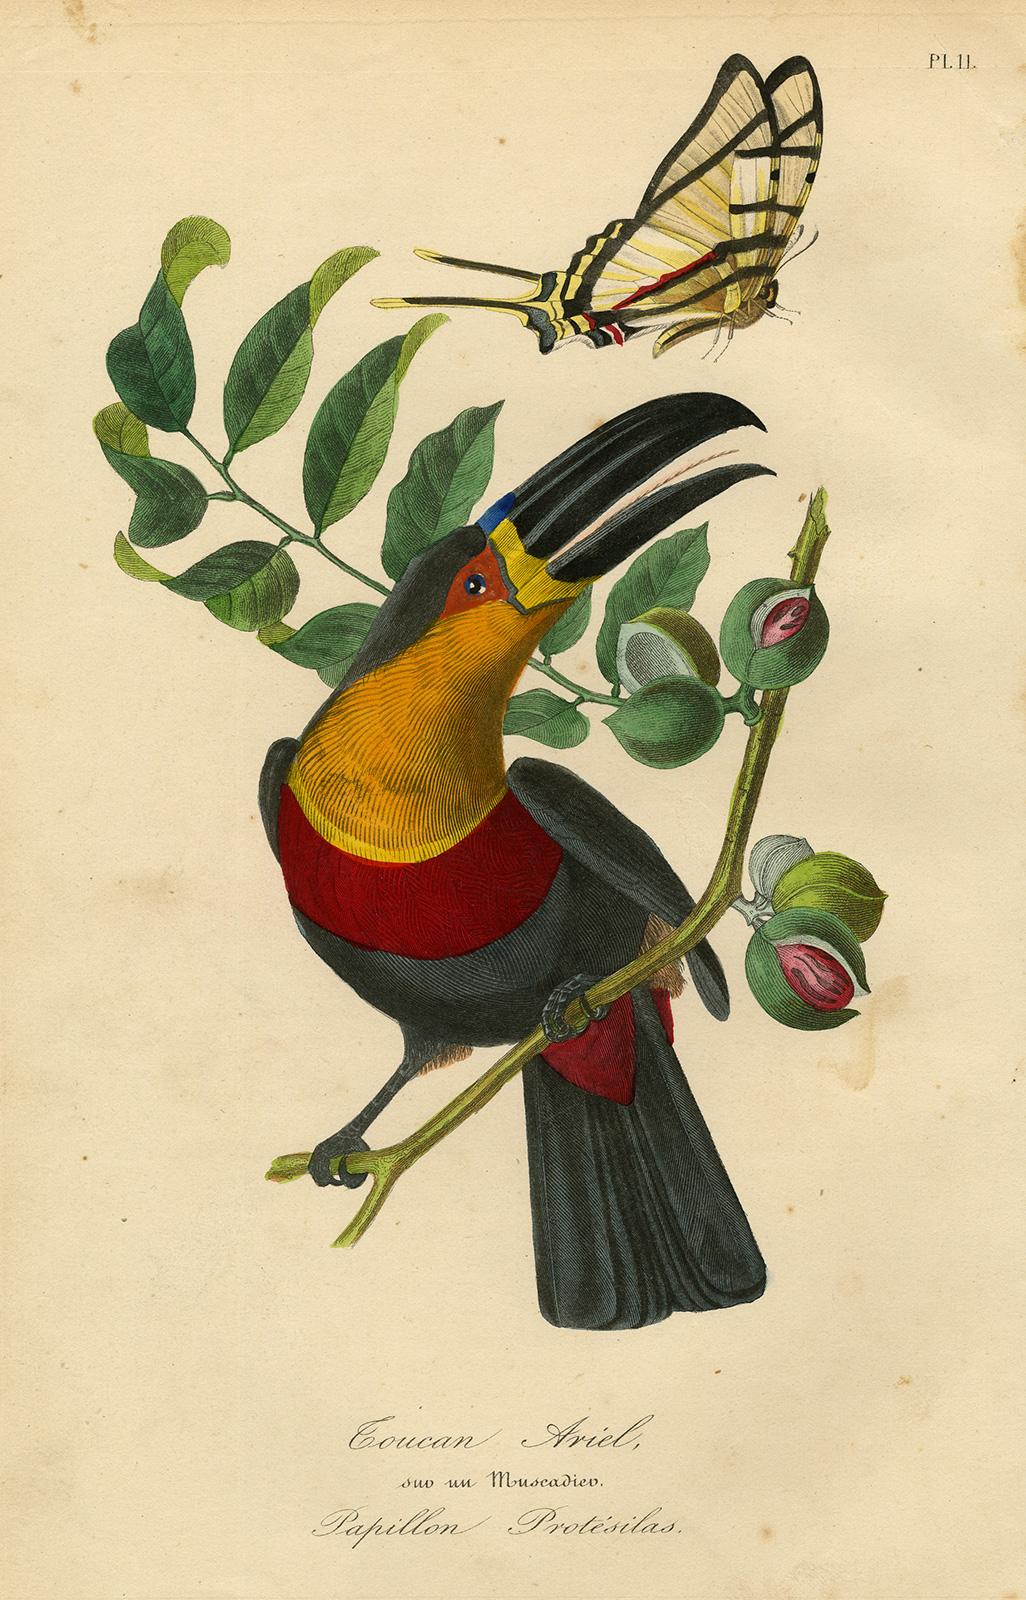 Jean-Emmanuel-Marie Le Maout Animal Print - A toucan in a nutmeg tree with a butterfly by Le Maout - Engraving - 19th c.